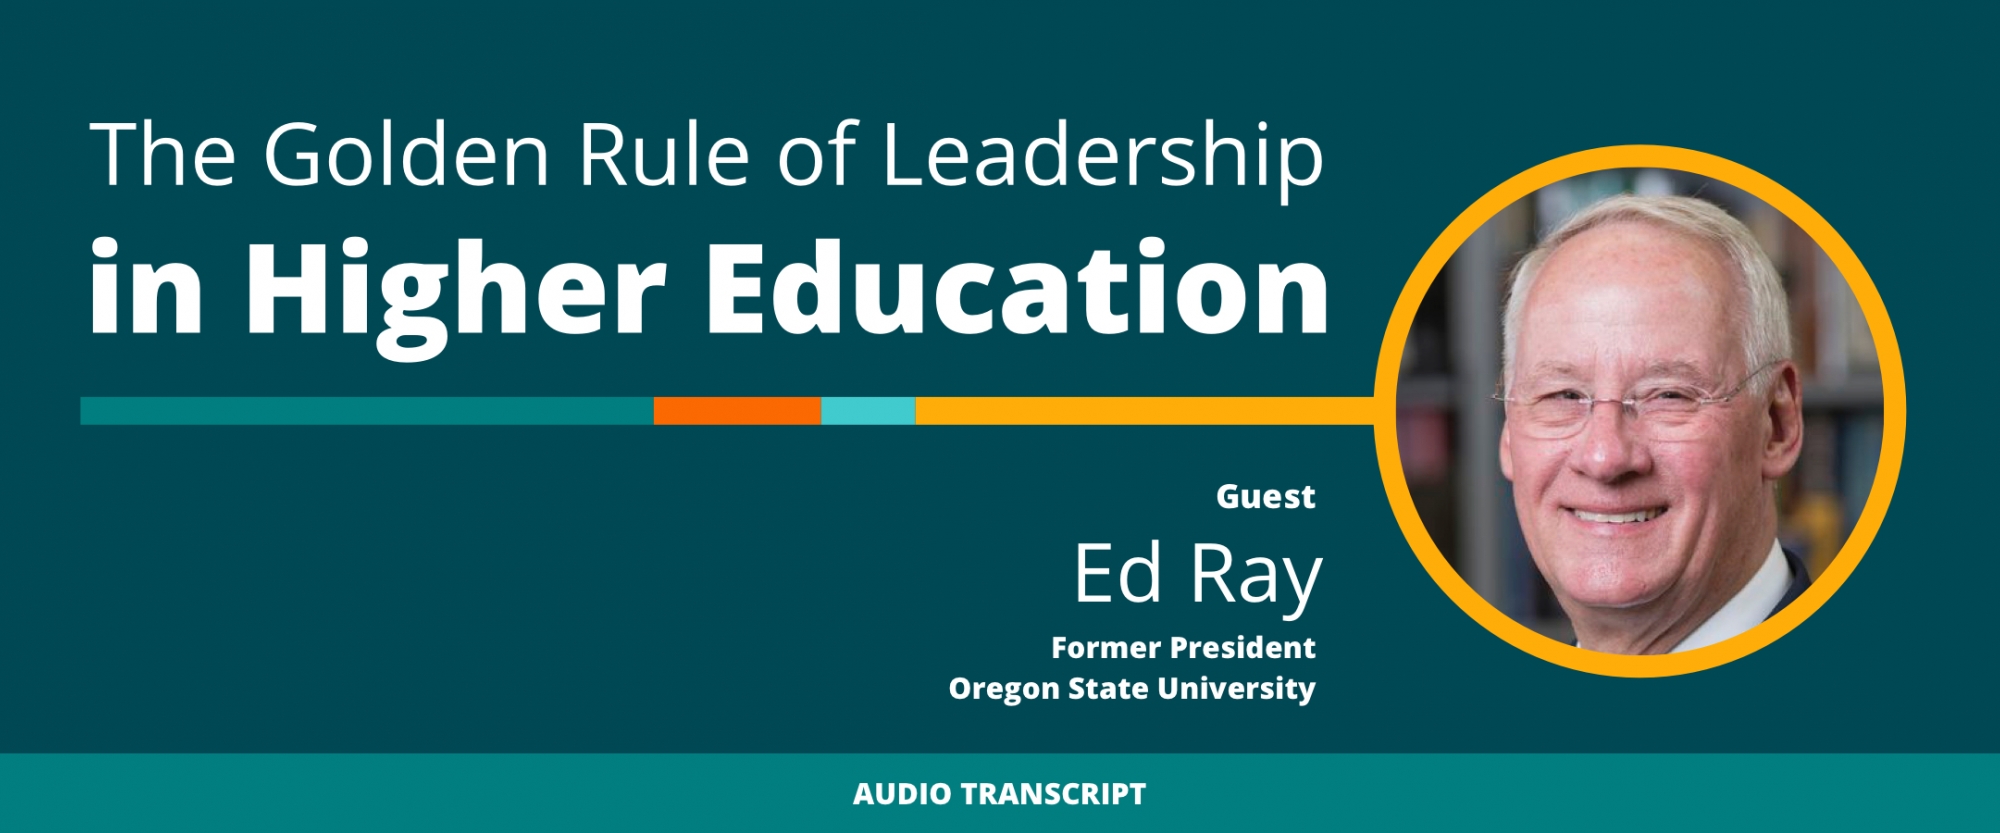 Weekly Wisdom Episode 5: Transcript of Conversation With Ed Ray, Former President, Oregon State University